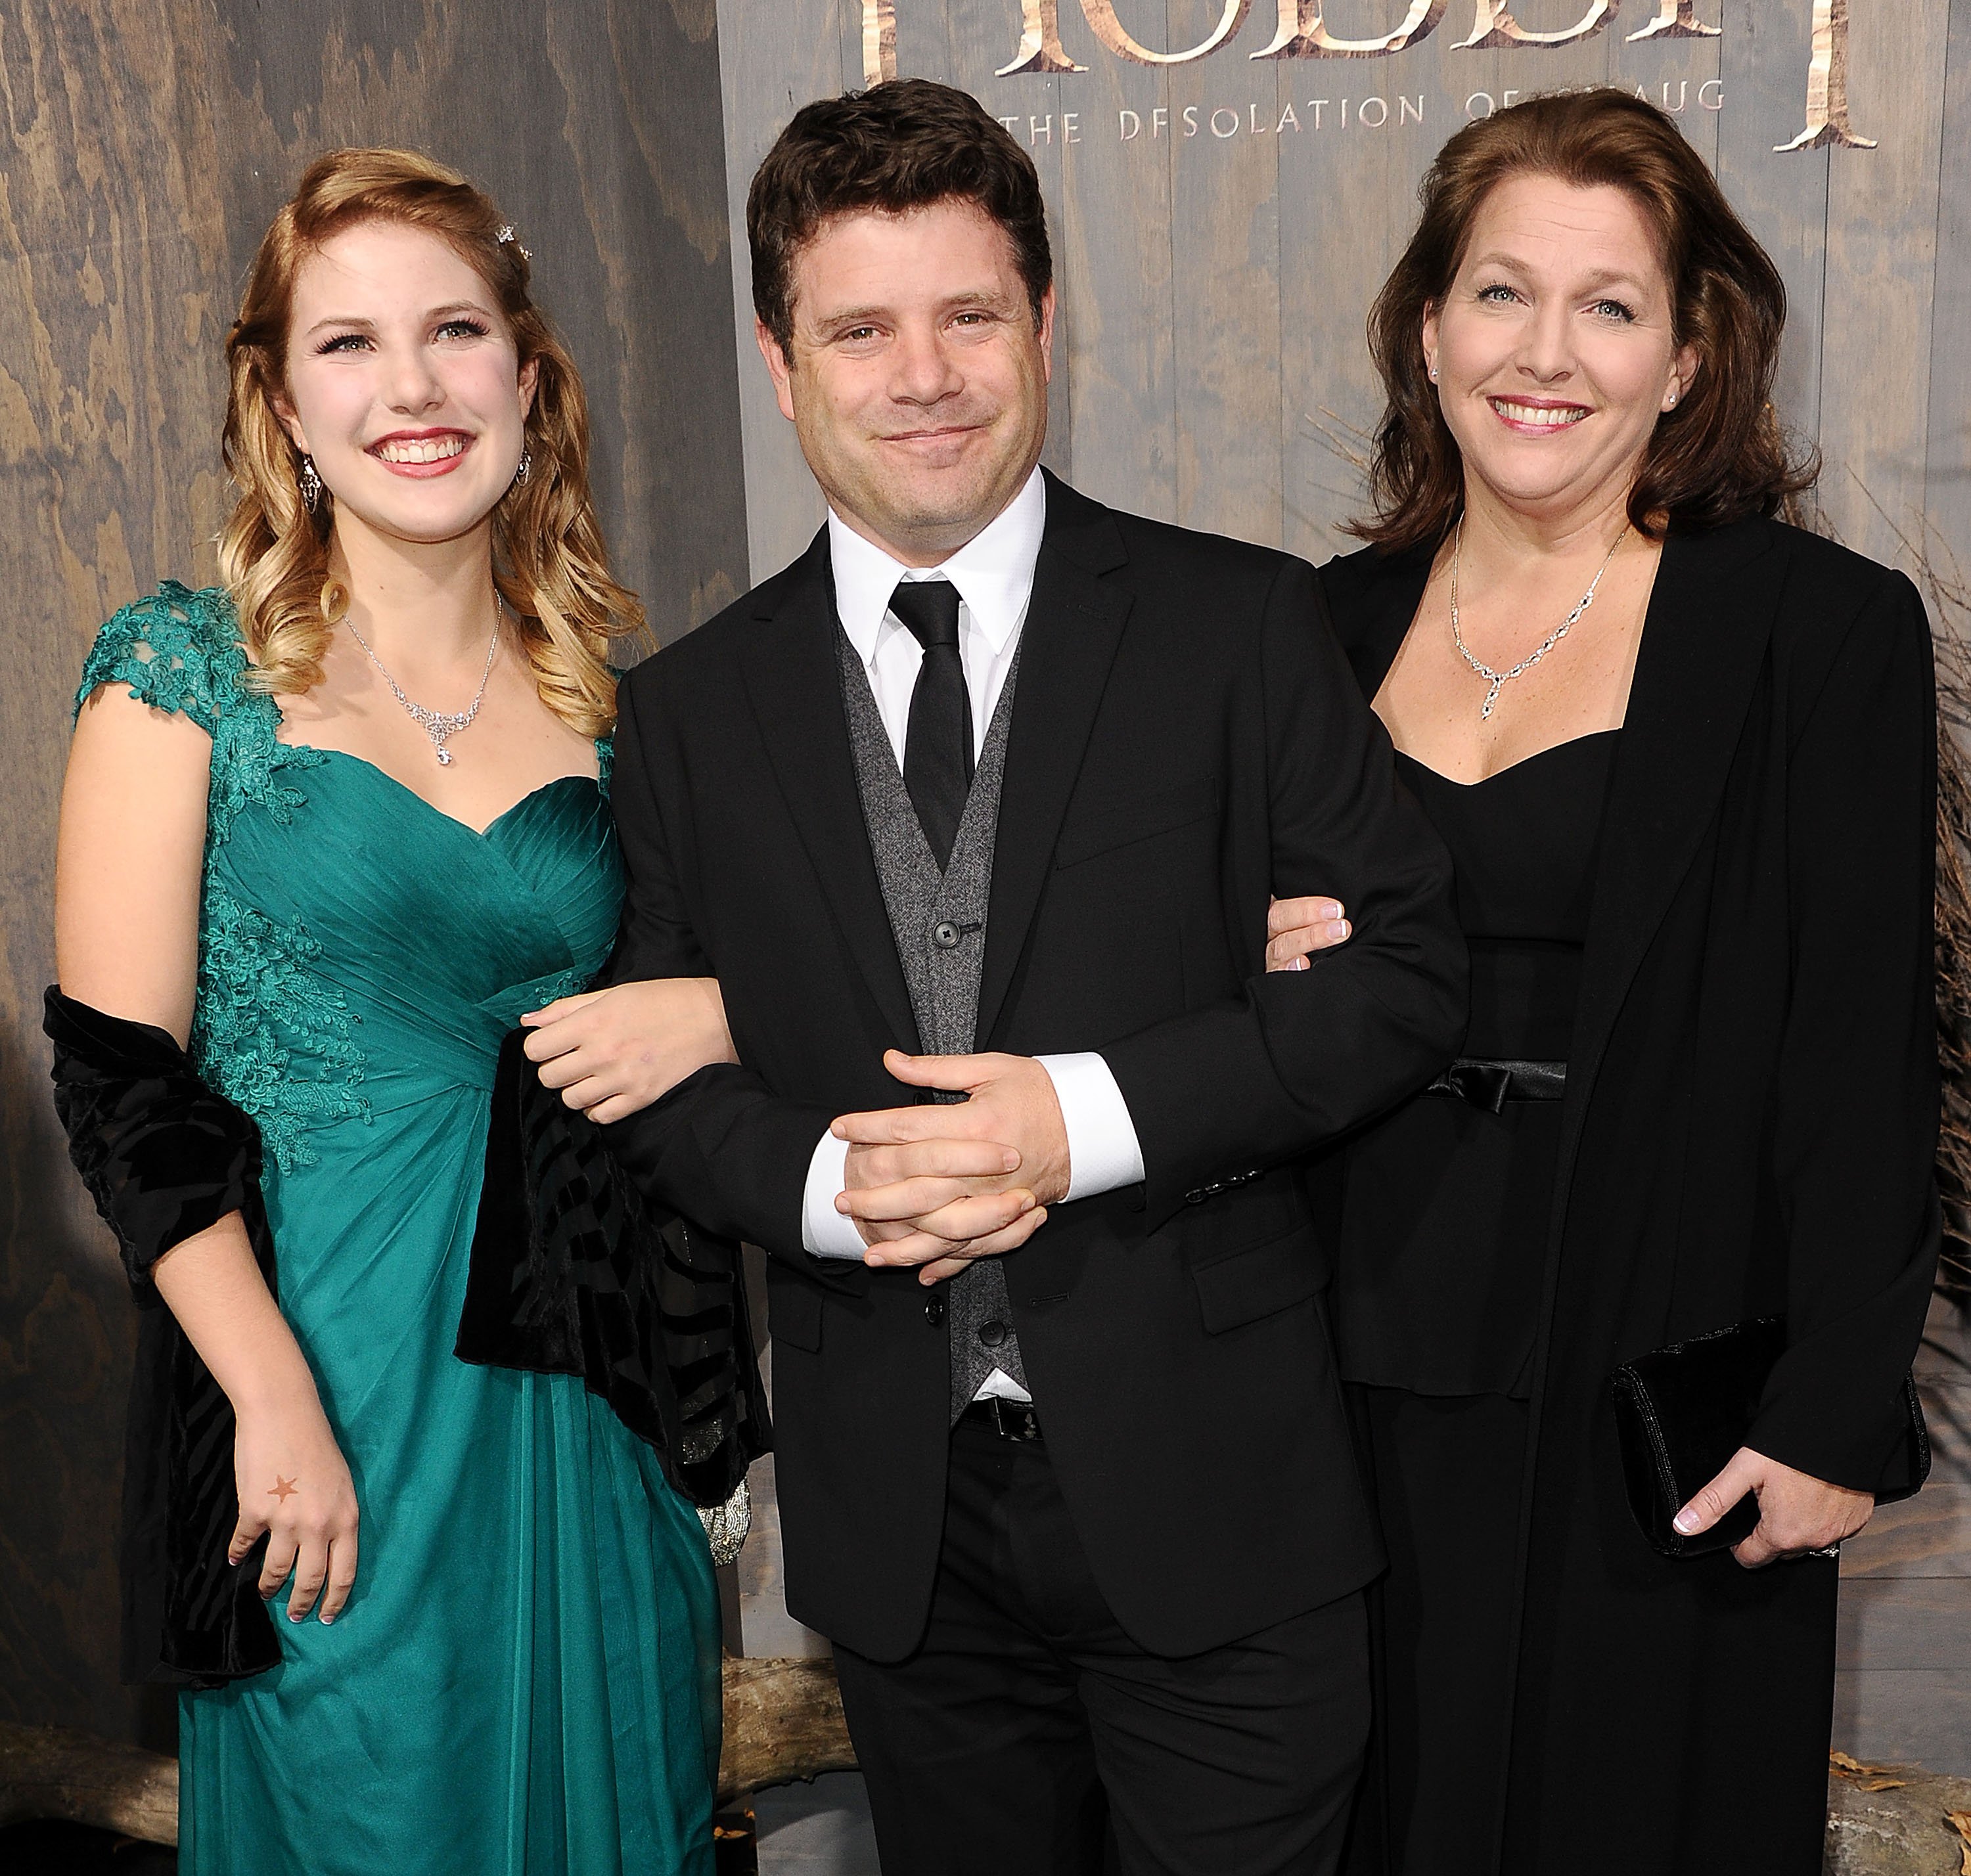 Actor Sean Astin (C), with daugther Ali Astin (L) and Christine Astin (R) attends the premiere of "The Hobbit: The Desolation Of Smaug" at TCL Chinese Theatre on December 2, 2013 in Hollywood, California. | Source: Getty Images